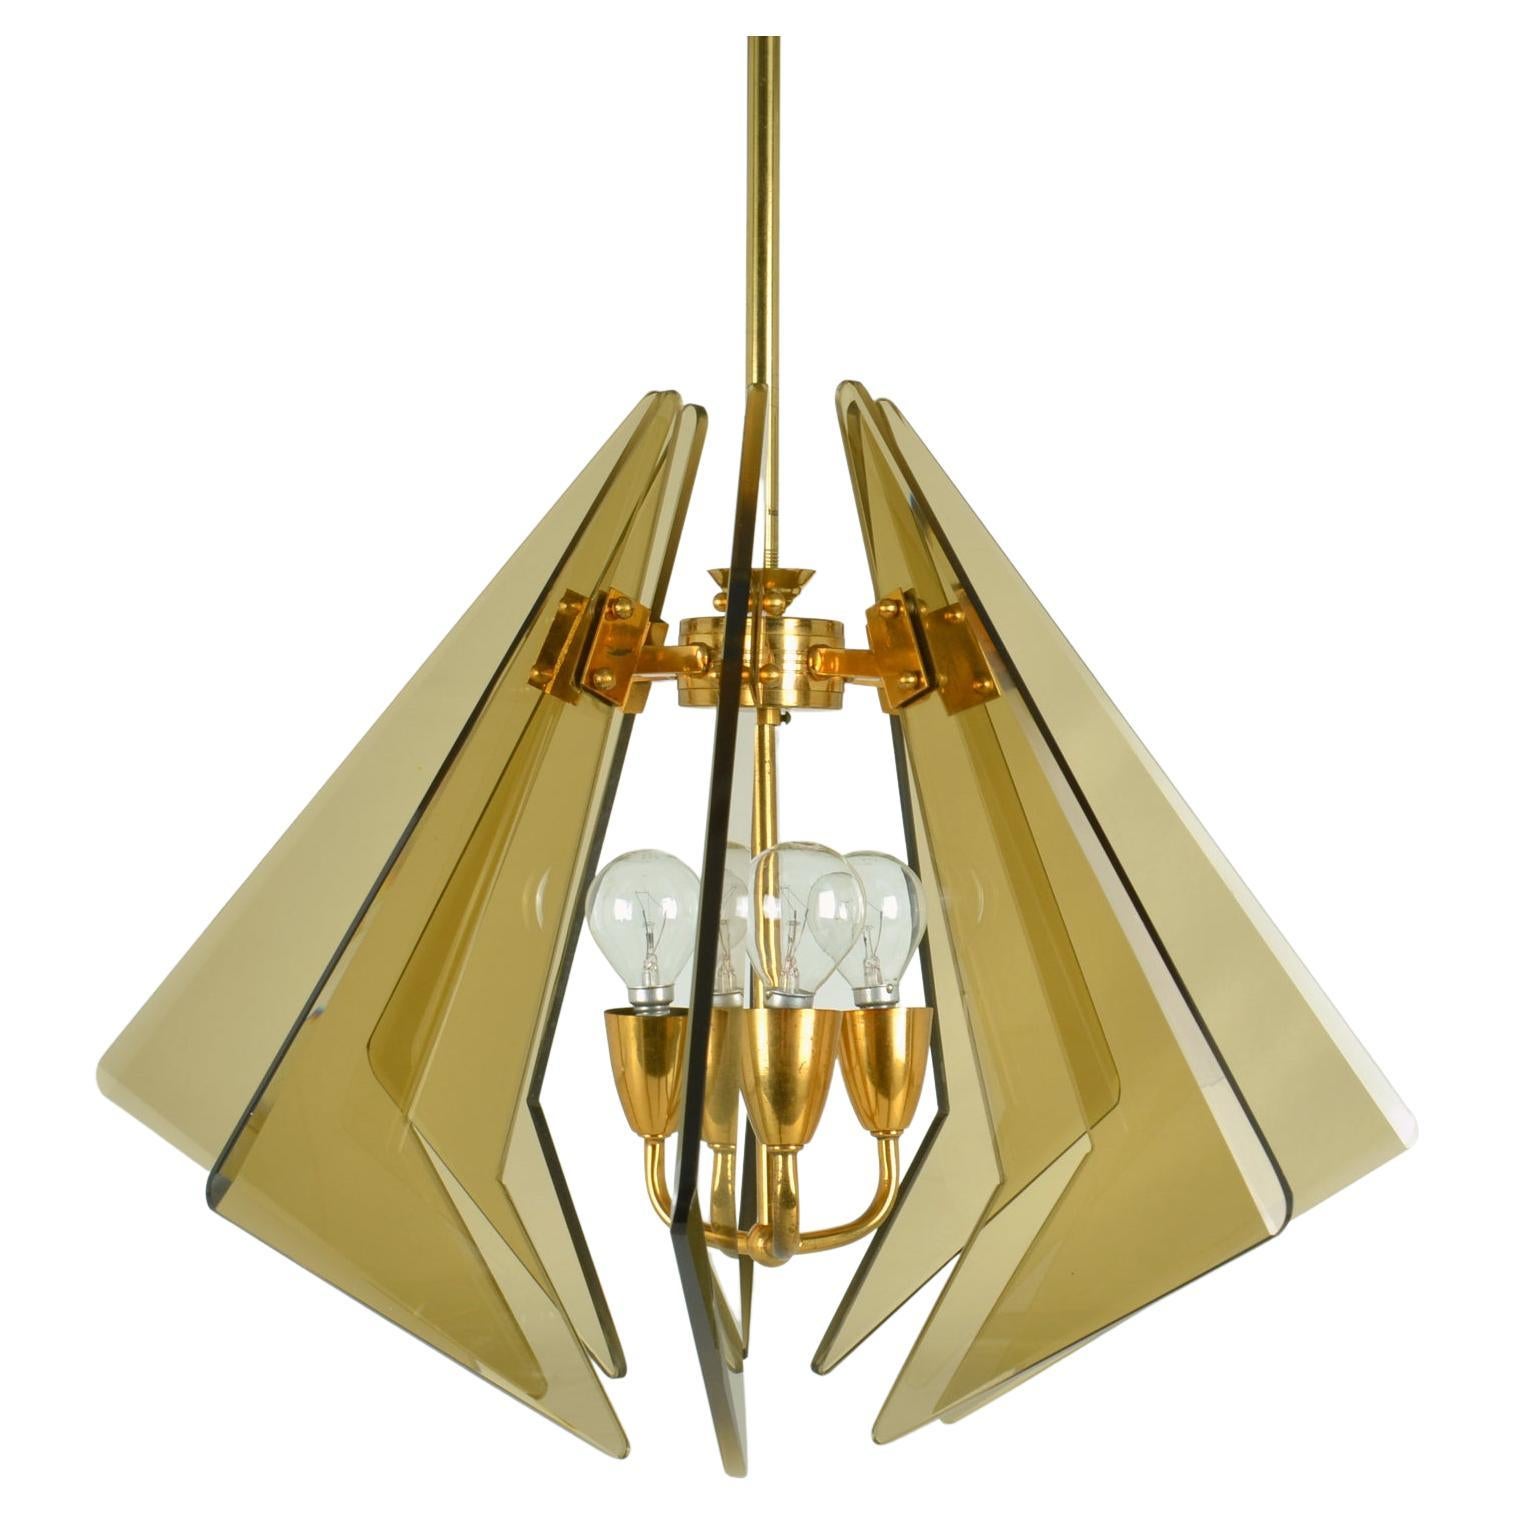 Fontana Arte glass diamond shaped chandelier consists of eight triangular pieces of tinted and faceted hand cut glass. They have been positioned vertically that radiate around a gilded brass frame. The lamp is attributed to Gino Paroldo who designed